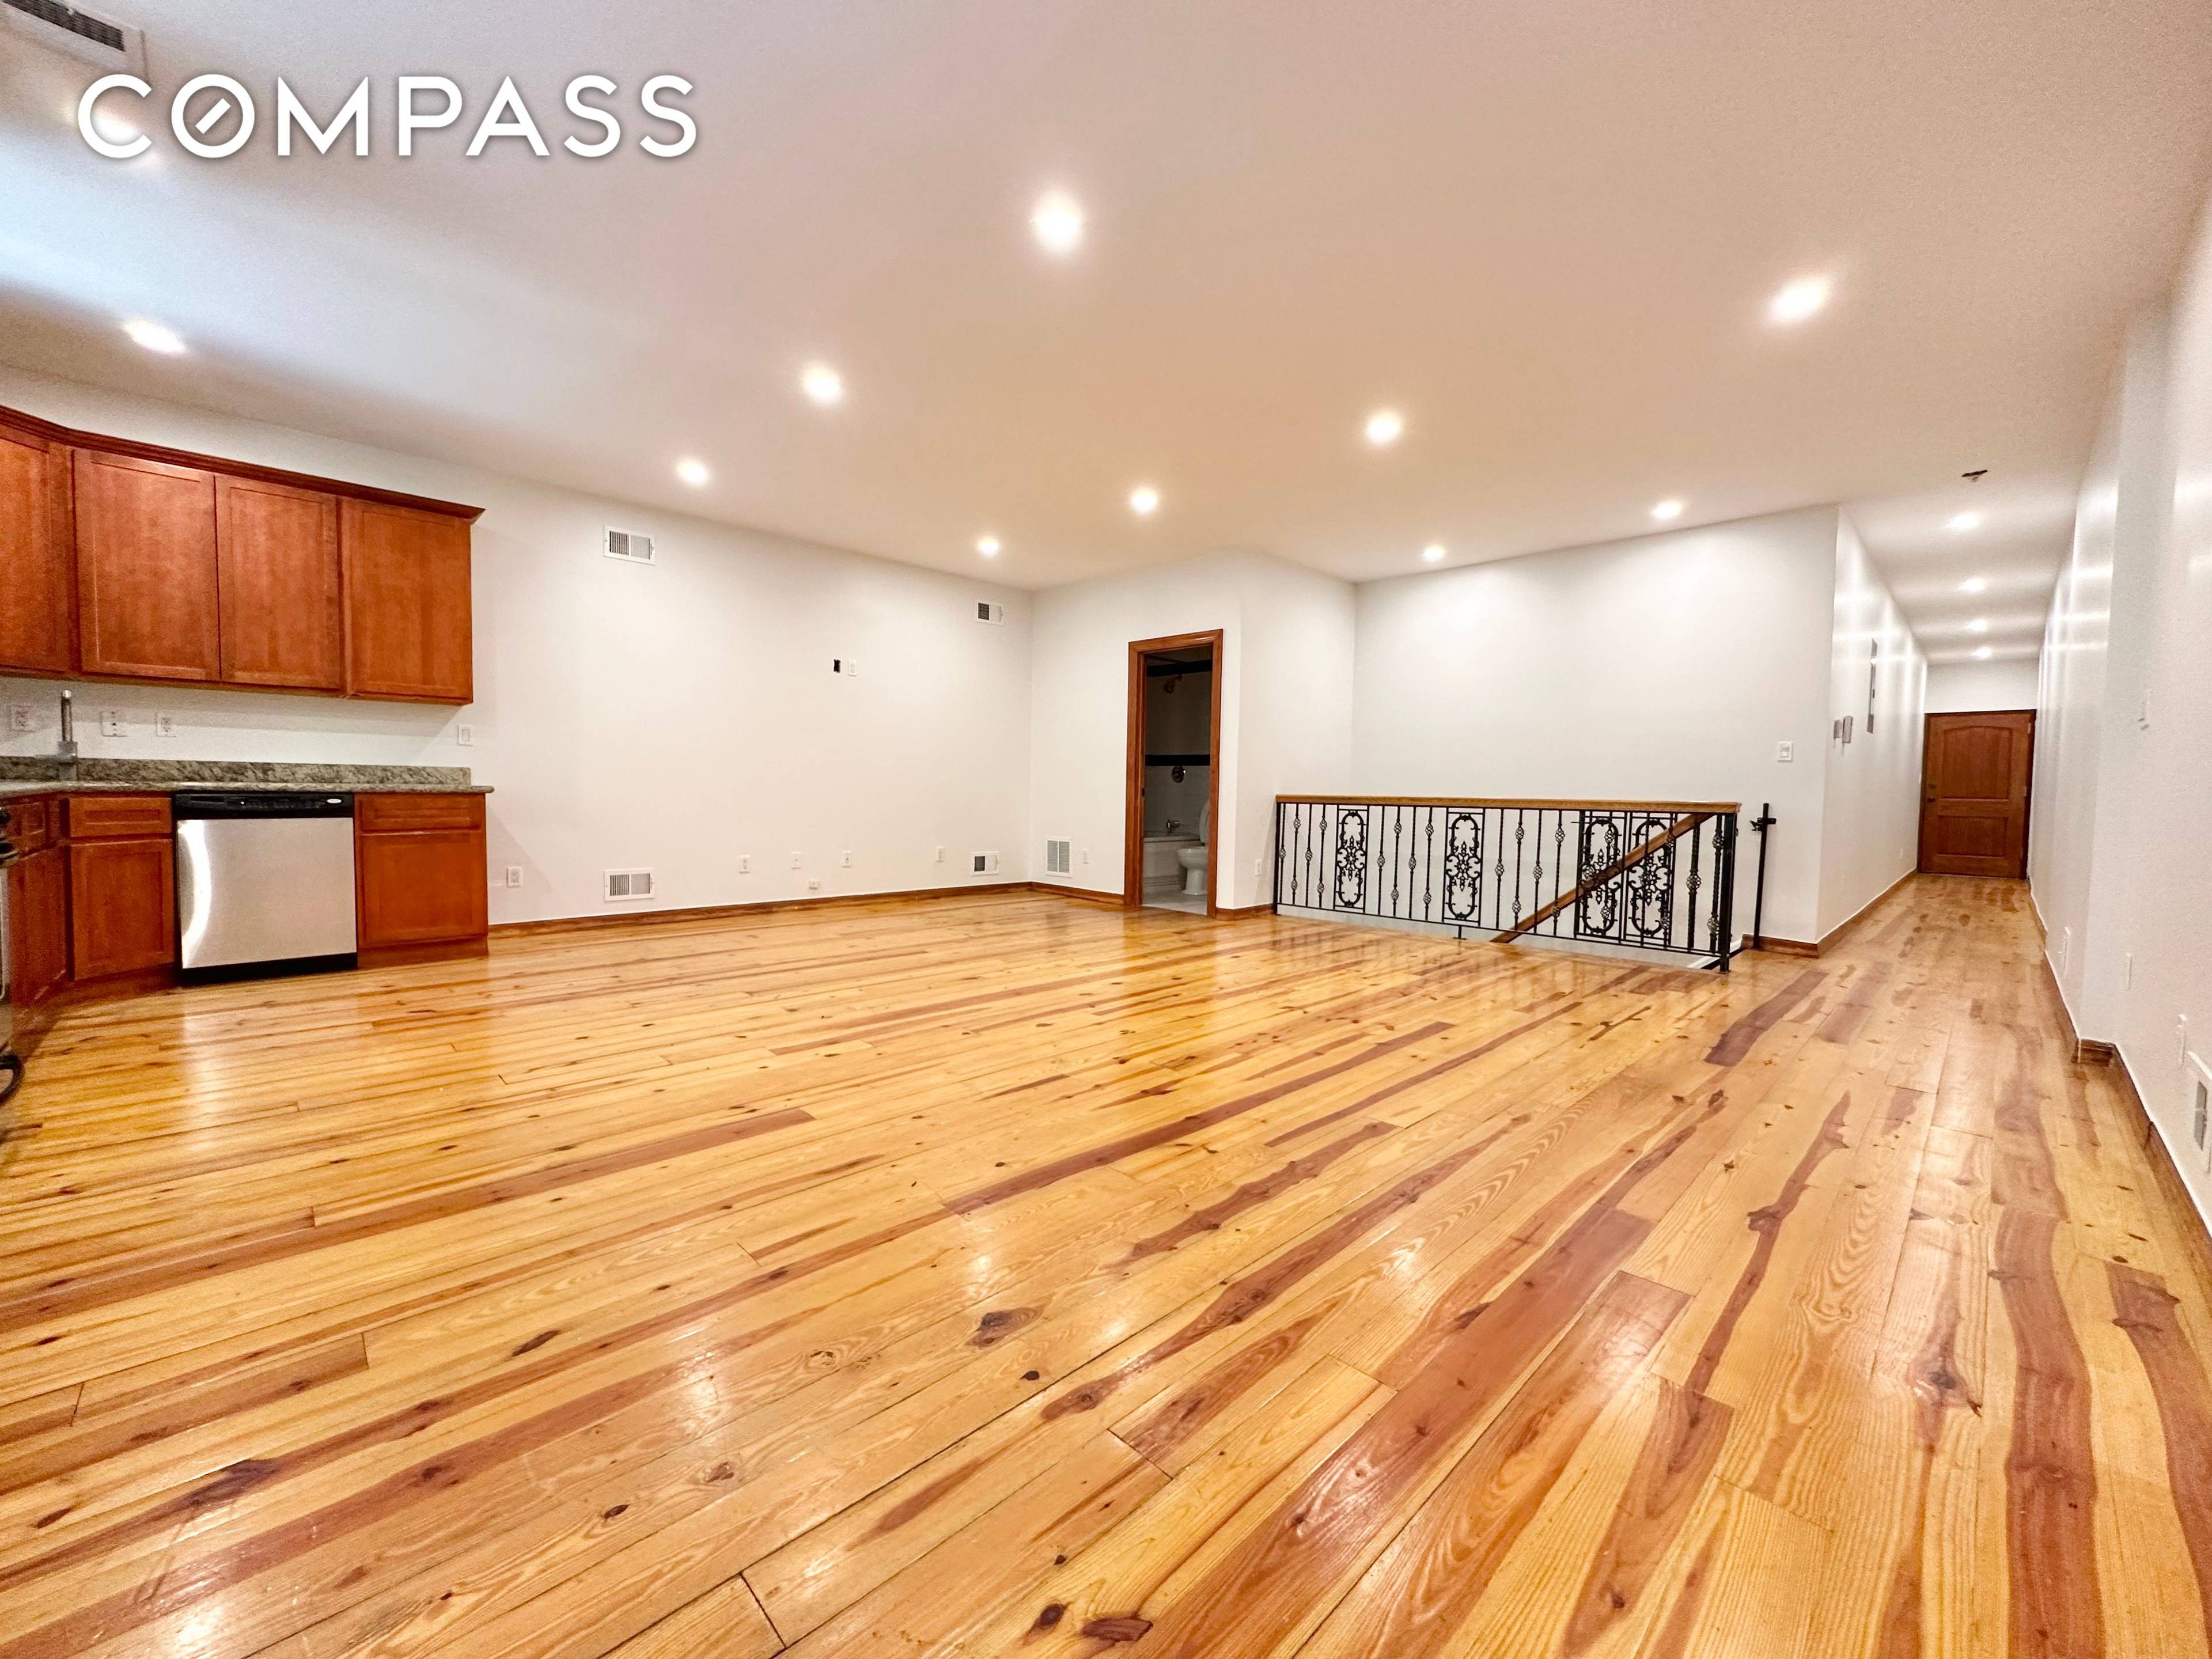 Come enjoy Brooklyn townhome living in this sprawling, 24 ft wide duplex residence, ideally located on leafy Luquer Street ; tucked away on the border of Red Hook, Carroll Gardens, ...